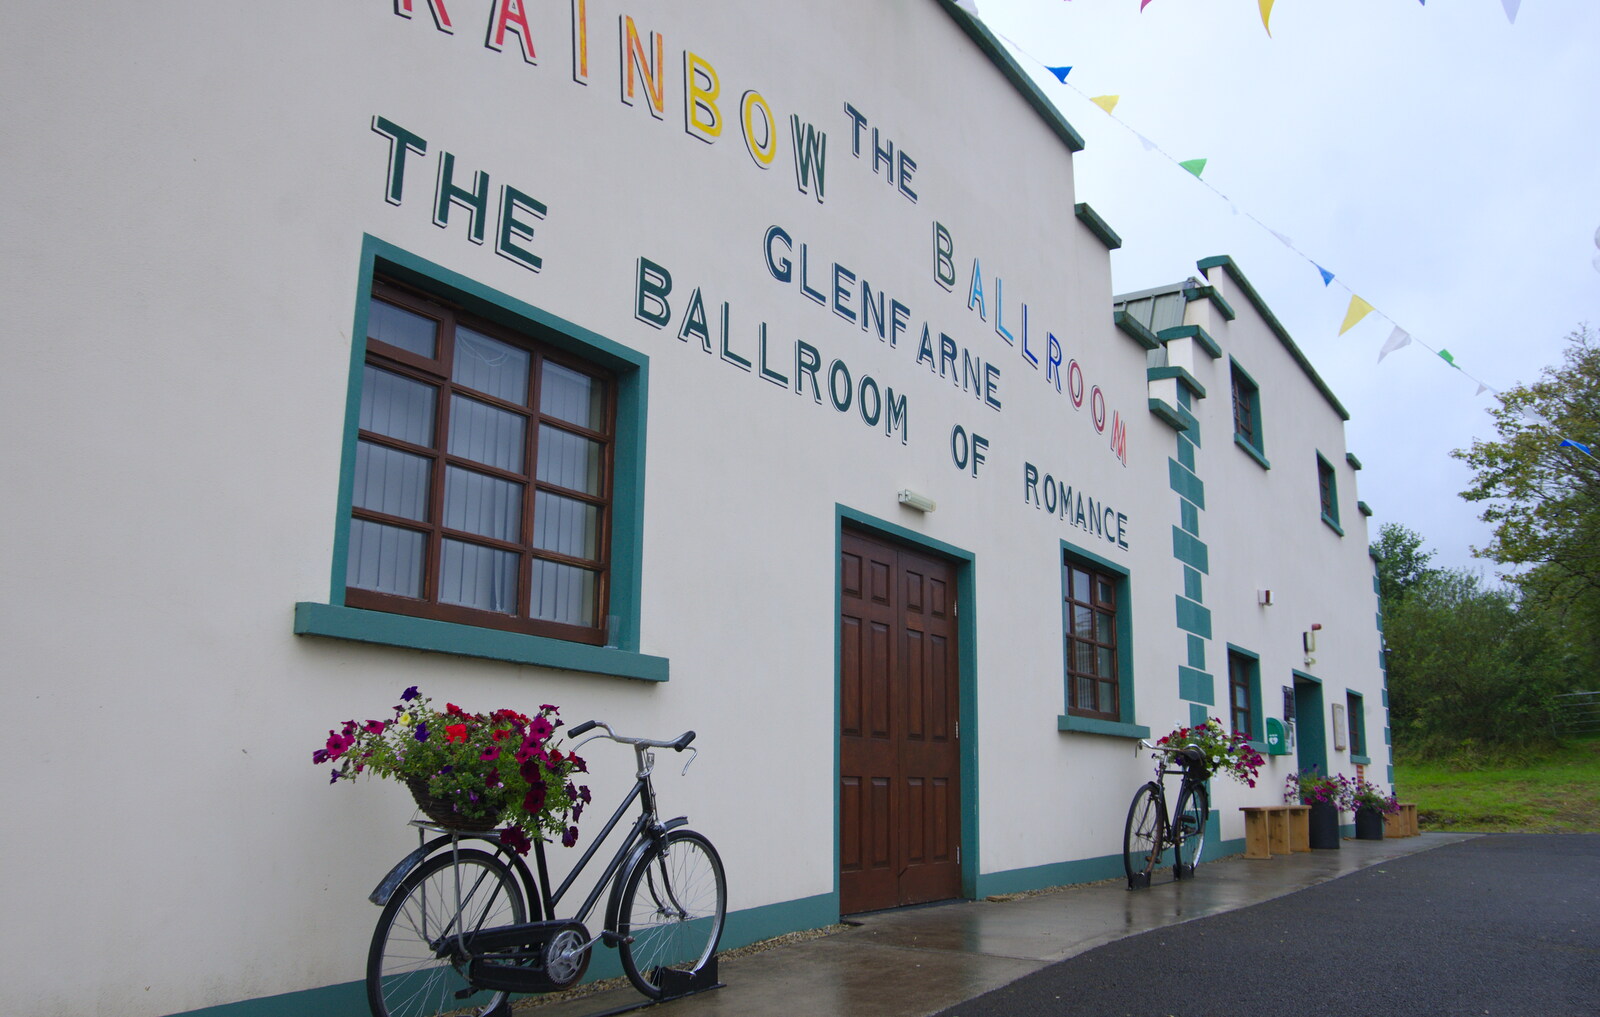 Another visit to the legendary Rainbow Ballroom from Travels in the Borderlands: An Blaic/Blacklion to Belcoo and back, Cavan and Fermanagh, Ireland - 22nd August 2019